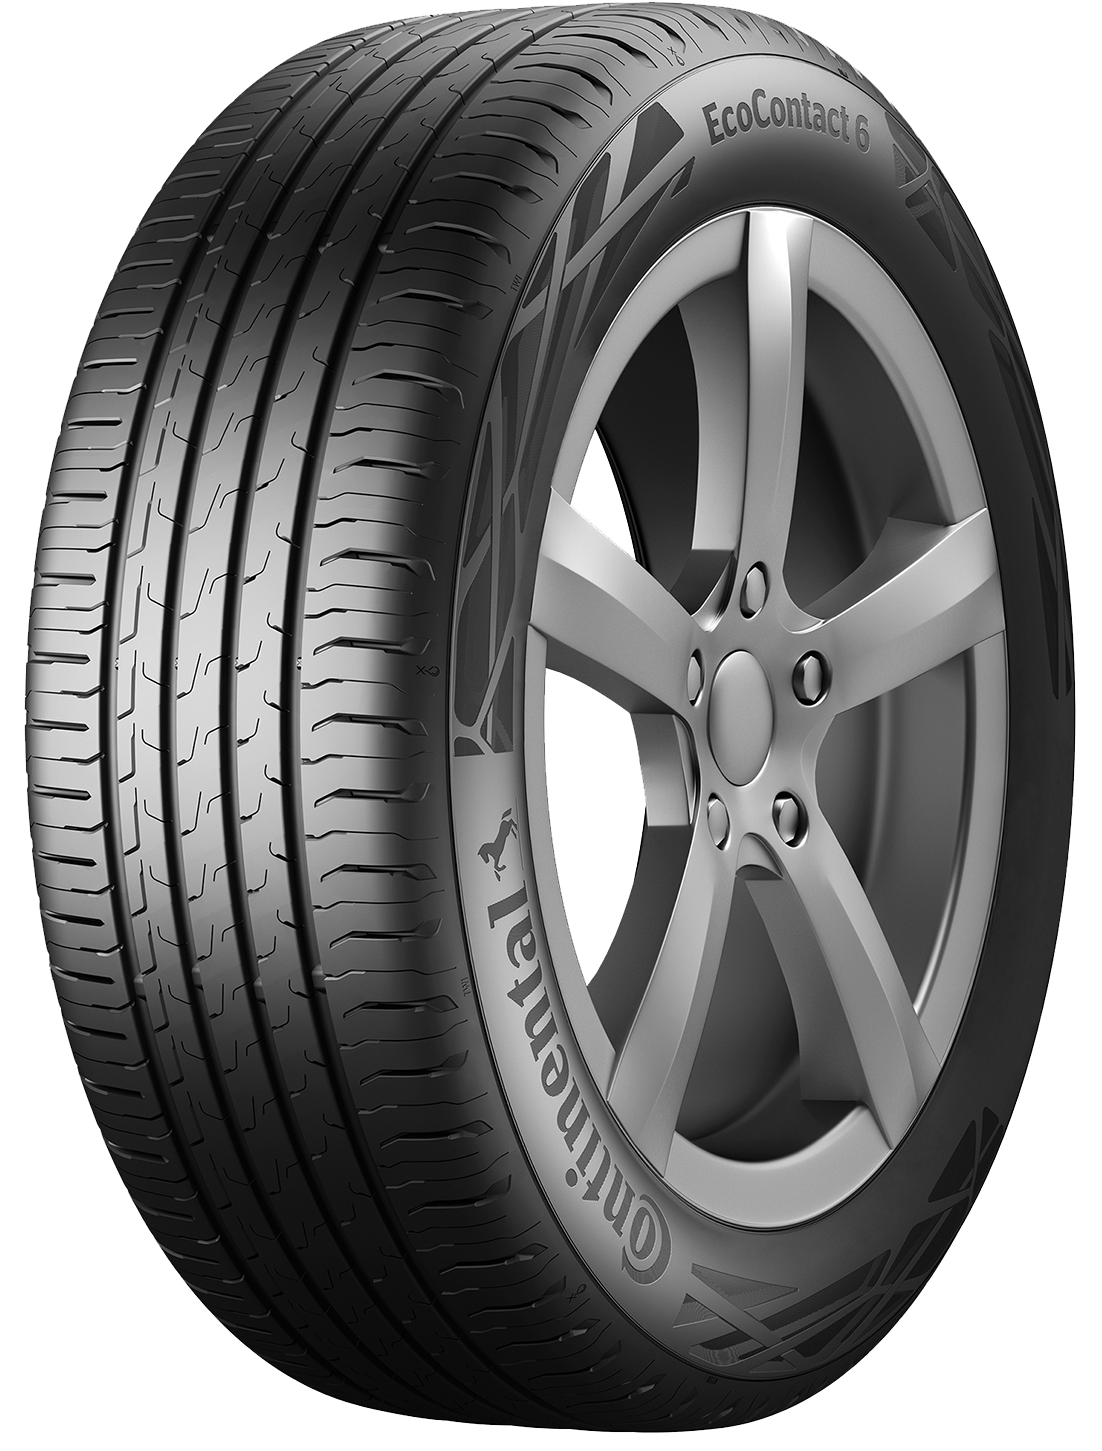 Top Ratings for Both – Wet - Rolling Tires from and Stellantis AG on Continental for Resistance Relies Grip e-SUVs Continental